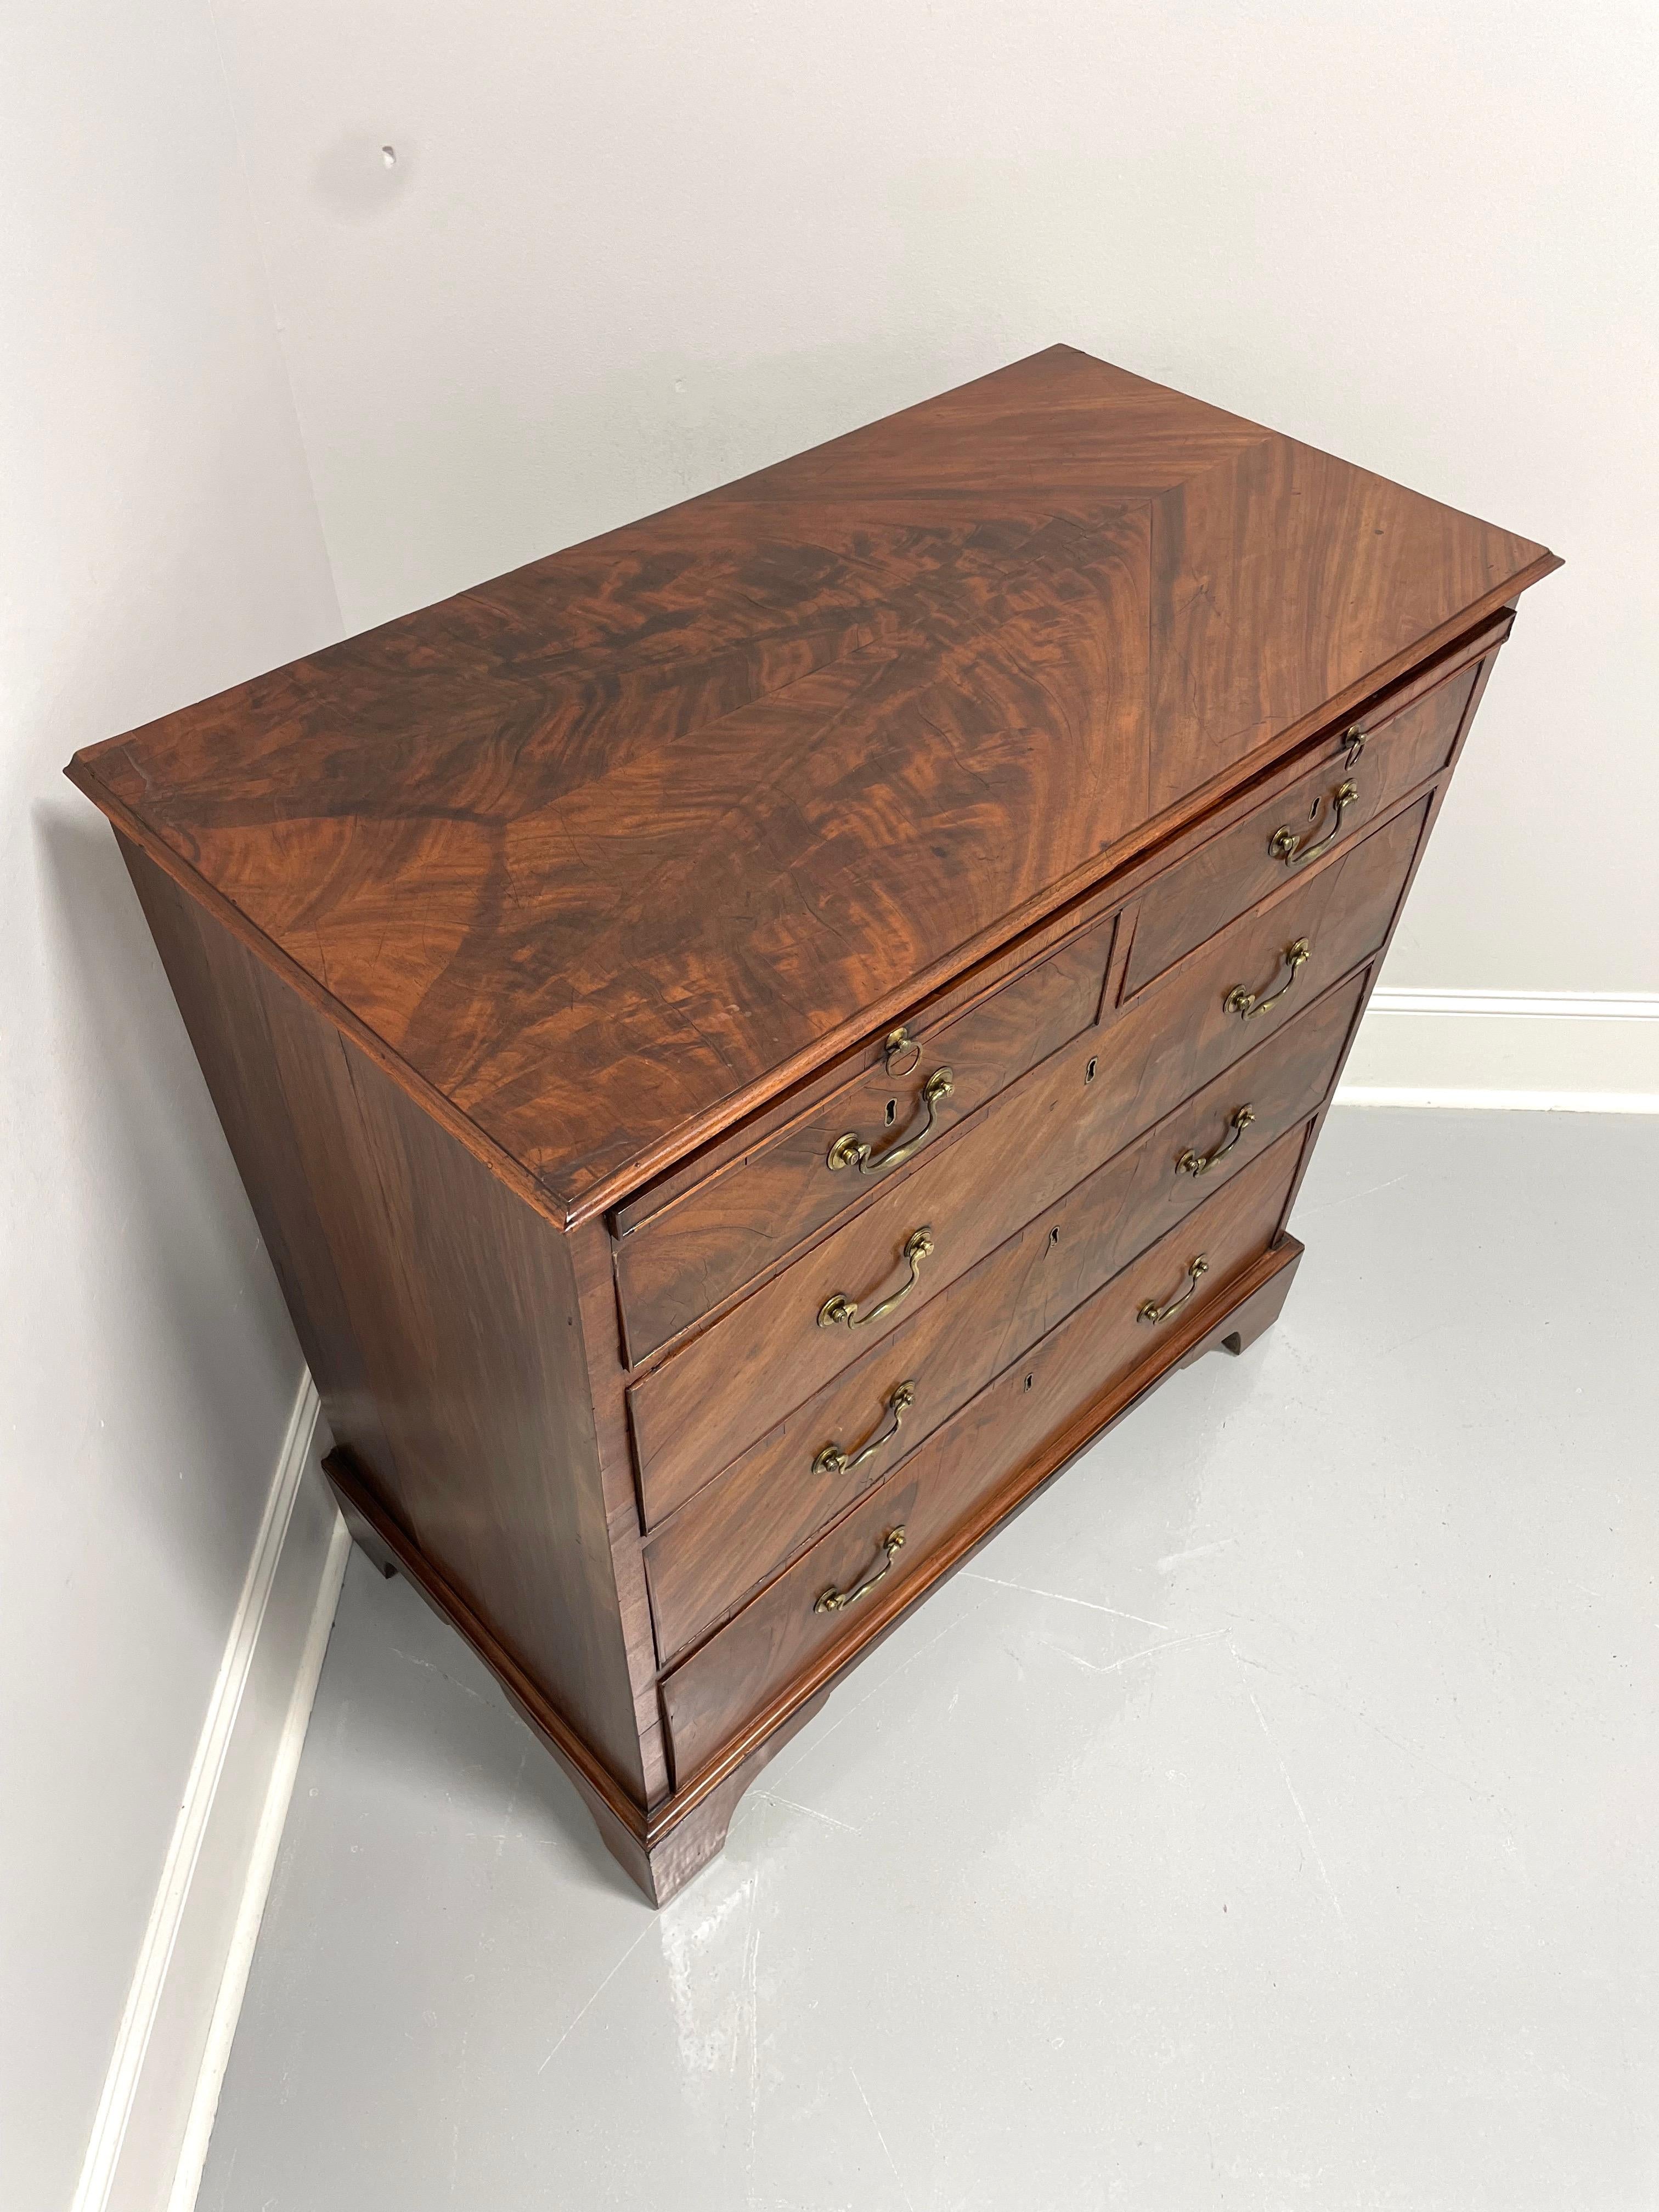 An antique Chippendale style bachelor chest, unbranded. Mahogany, flame mahogany veneers, brass hardware and bracket feet. Features brushing slide, two smaller over three larger dovetail drawers. Drawers have locks, untested, no key present. Made in